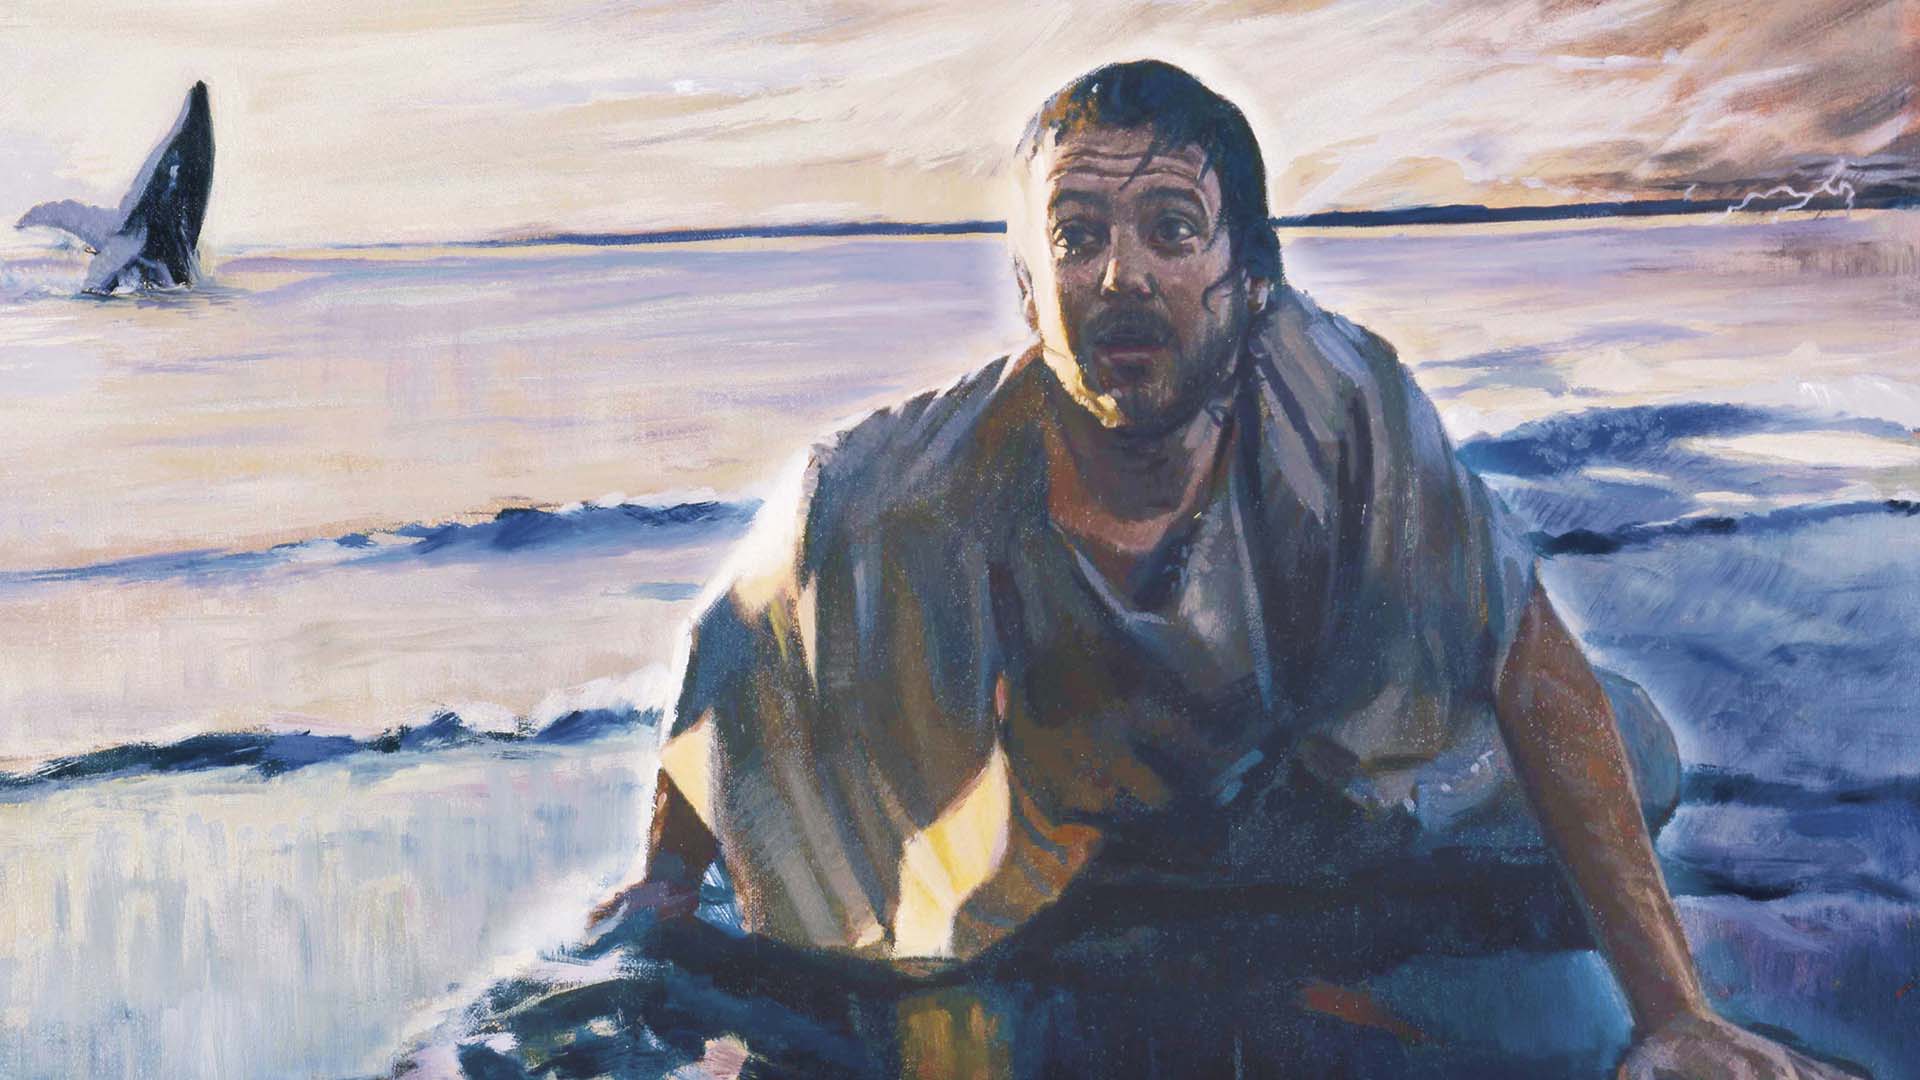 Jonah on the Beach at Nineveh, by Daniel A. Lewis. Image via Church of Jesus Christ.